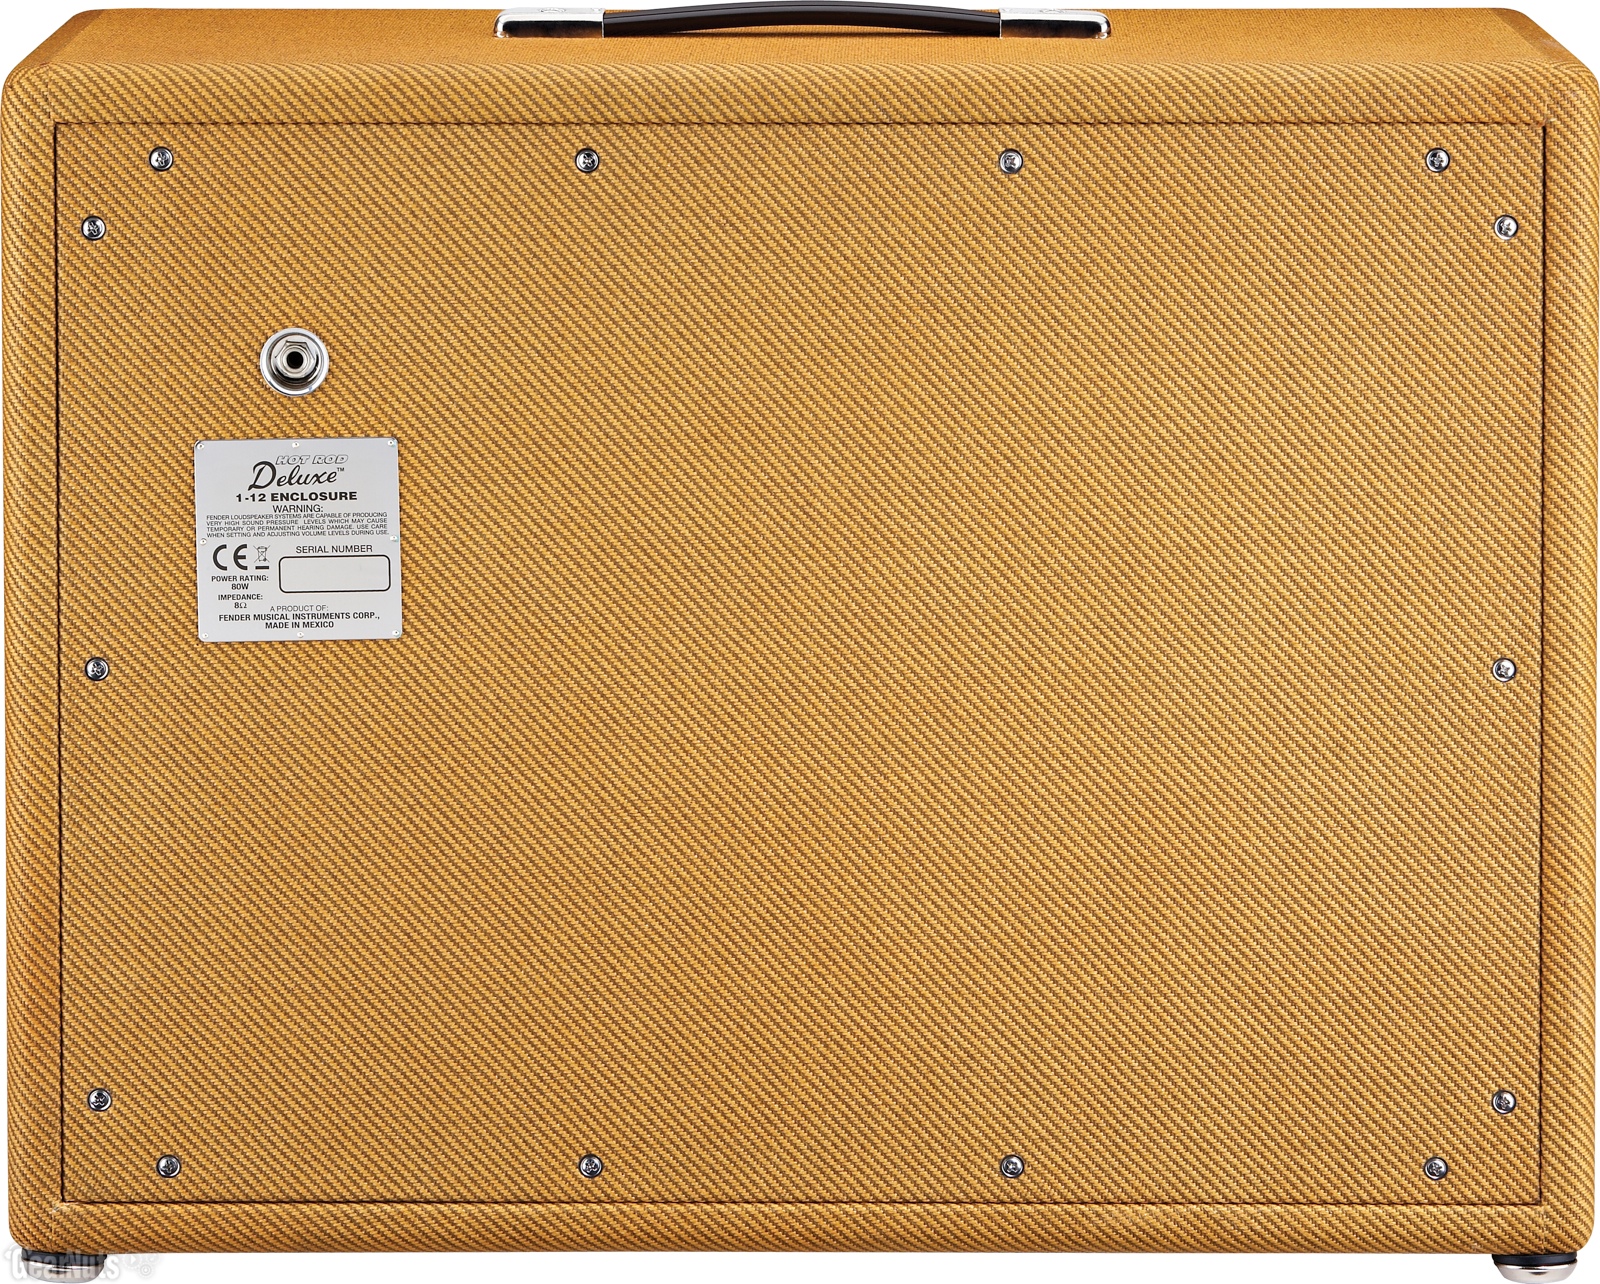 Fender Hot Rod Deluxe 112 80w 1x12 Lacquered Tweed - Baffle Ampli Guitare Électrique - Variation 1